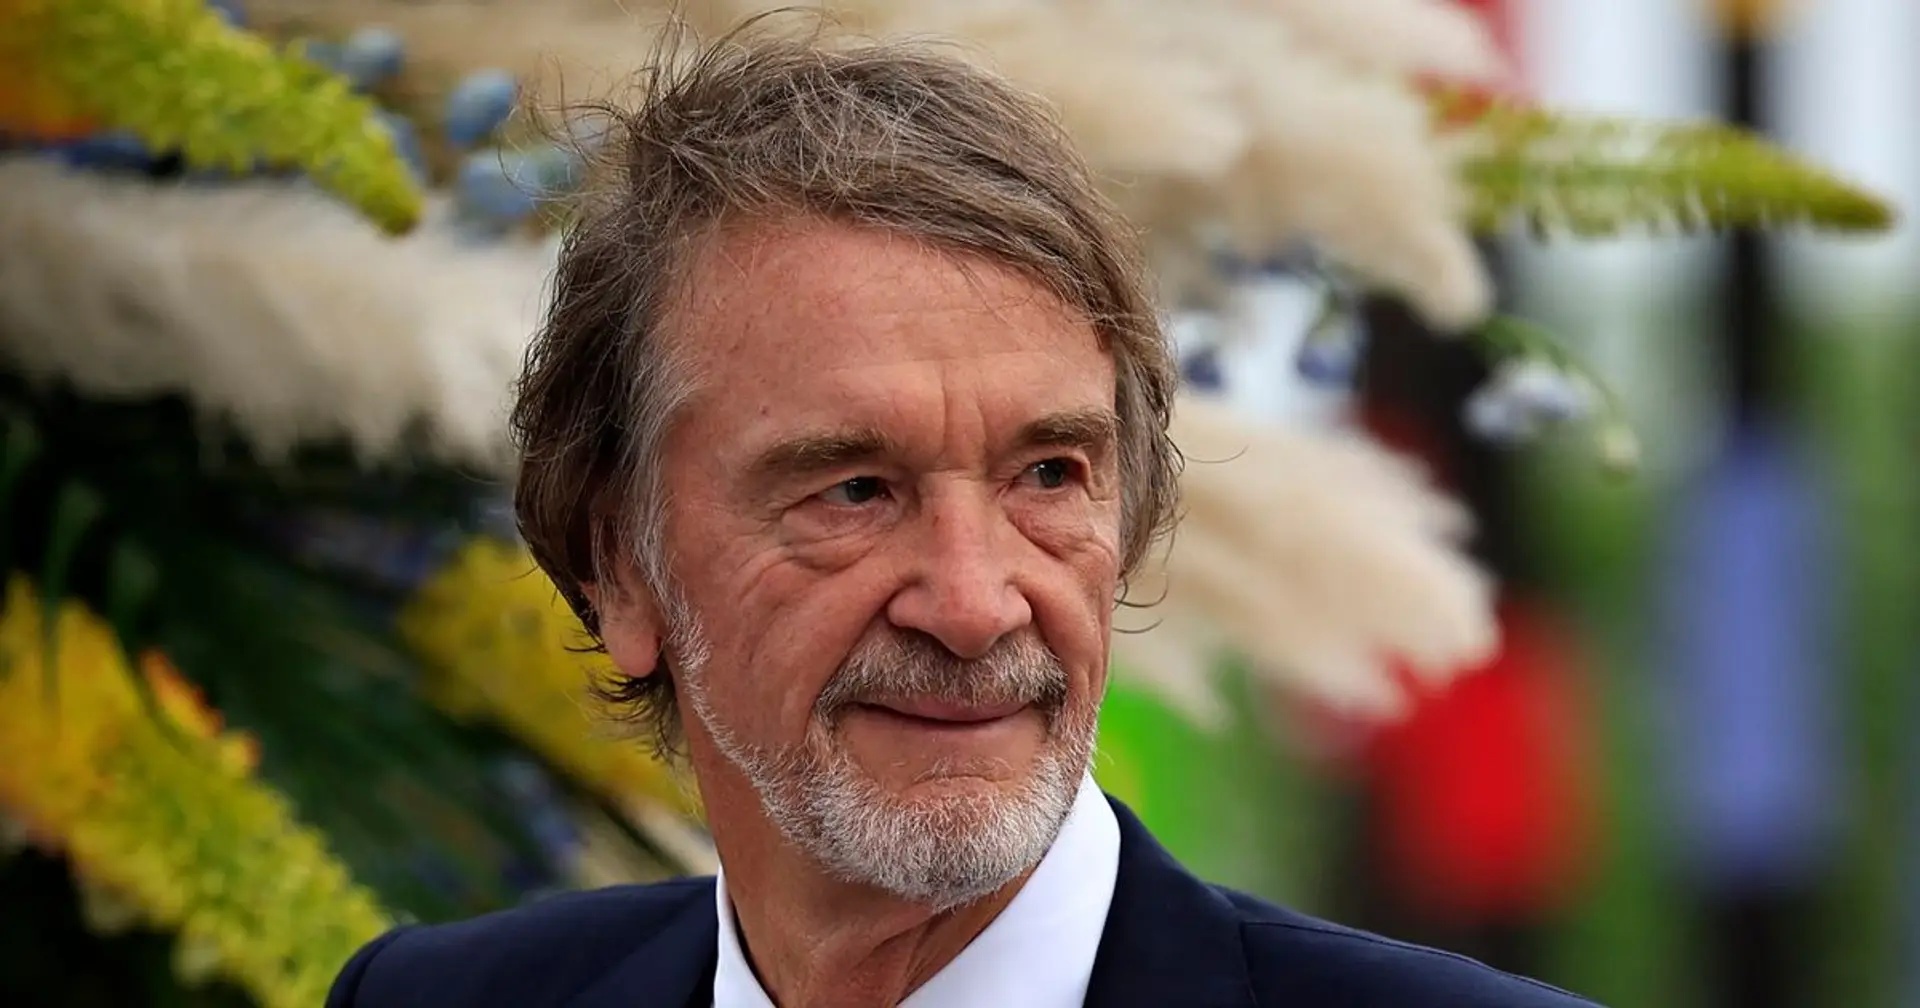 British billionaire Sir Jim Ratcliffe interested in buying stake in Man United with 'view to long-term ownership'